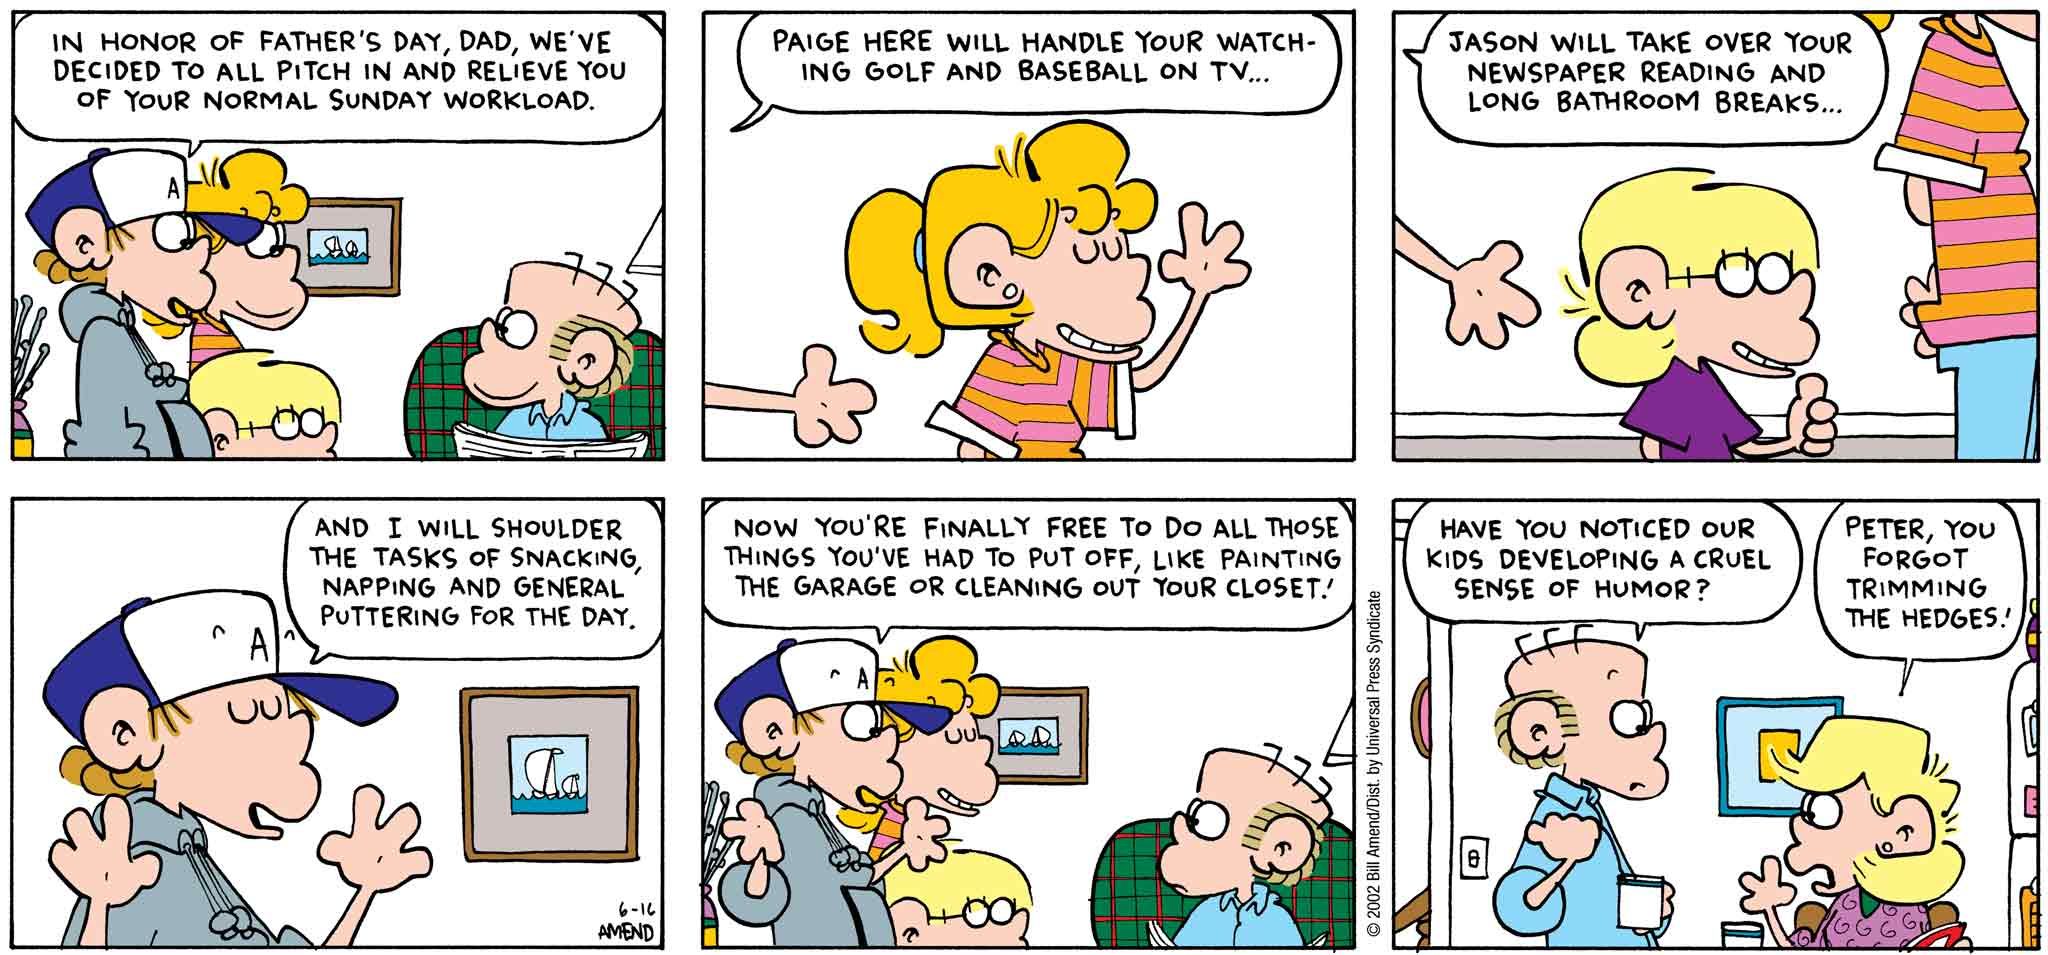 FoxTrot by Bill Amend - Father's Day comic published June 16, 2002 - Peter: In honor of Father's Day, Dad, we've decided to all pitch in and relieve you of your normal Sunday workload. Paige here will handle your watching golf and baseball on TV... Jason will take over your newspaper reading and long bathroom breaks... And I will shoulder the tasks of snacking, napping and general puttering for the day. Now you're finally free to do all those things you've had to put off, like painting the garage or cleaning out your closet! Roger: Have you noticed our kids developing a cruel sense of humor? Andy: Peter, you forgot trimming the hedges!